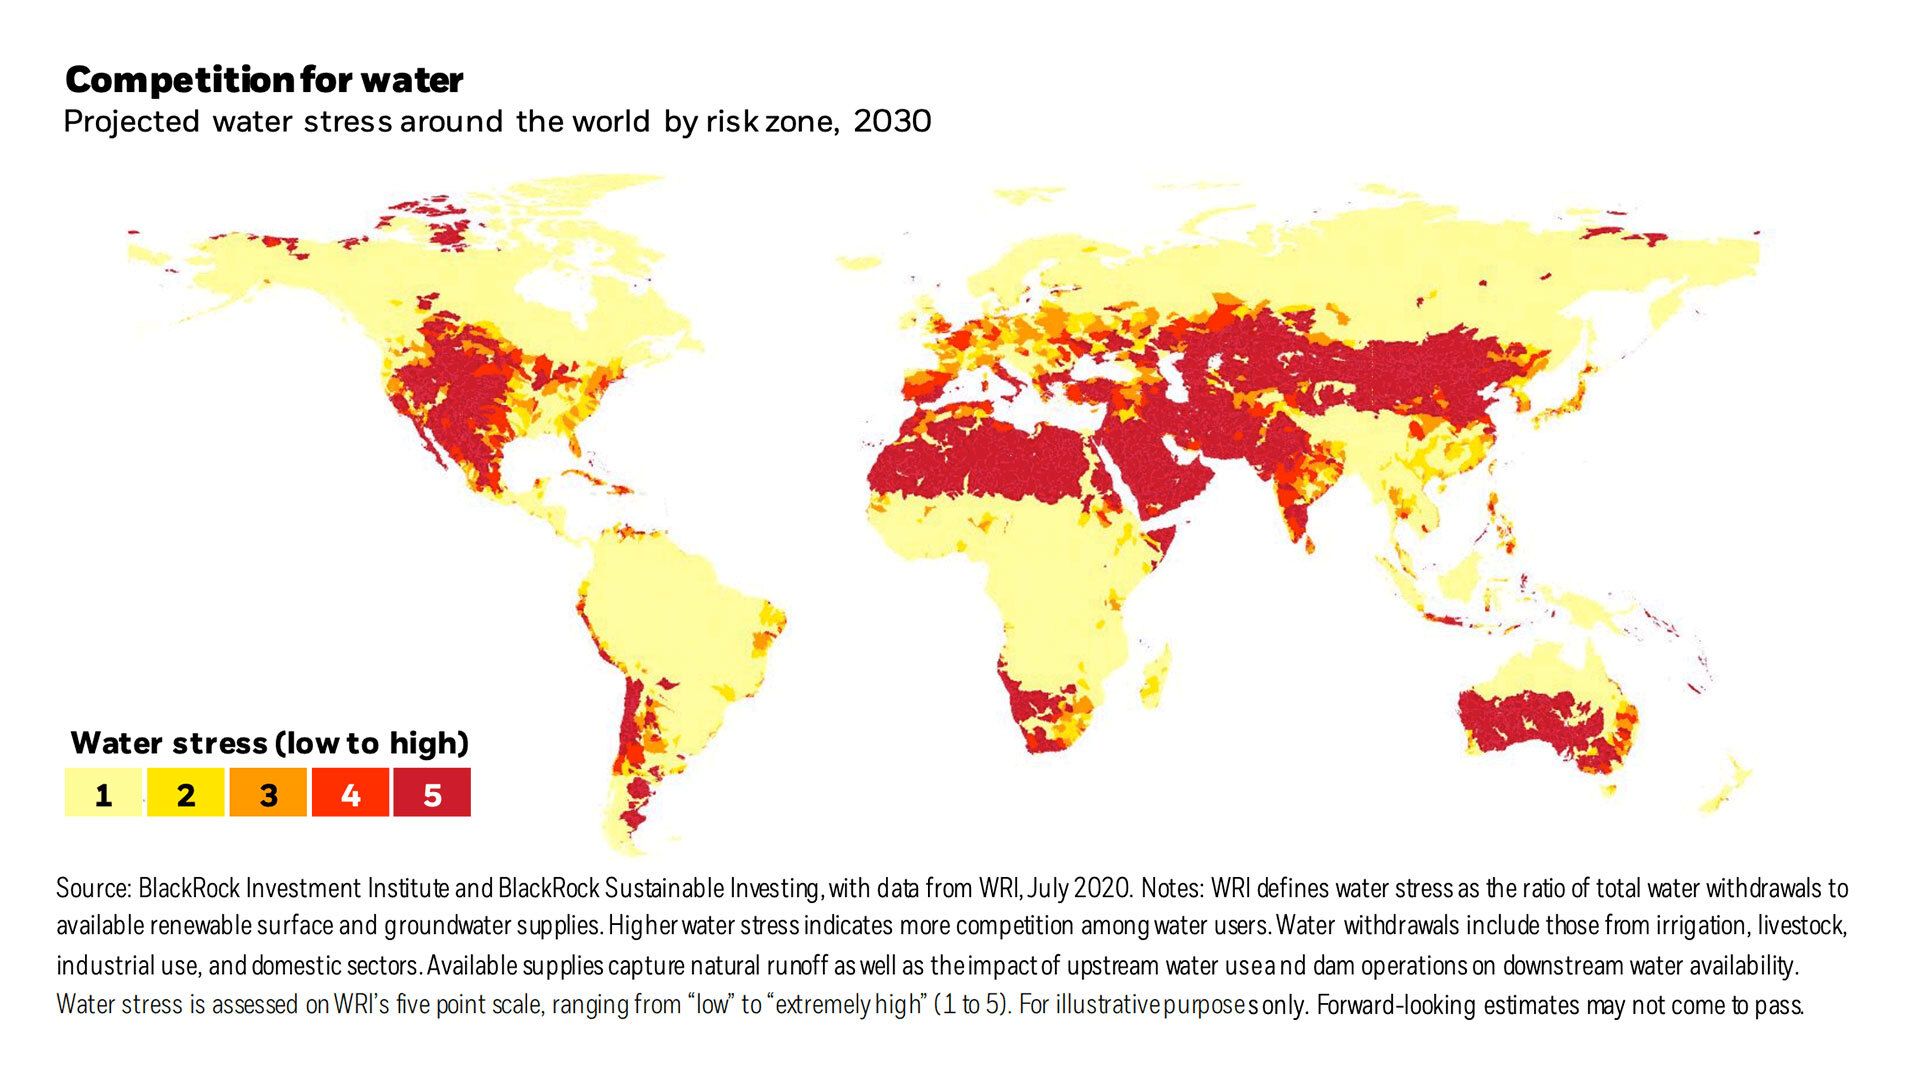 Image of global map of high water stress areas in 2030